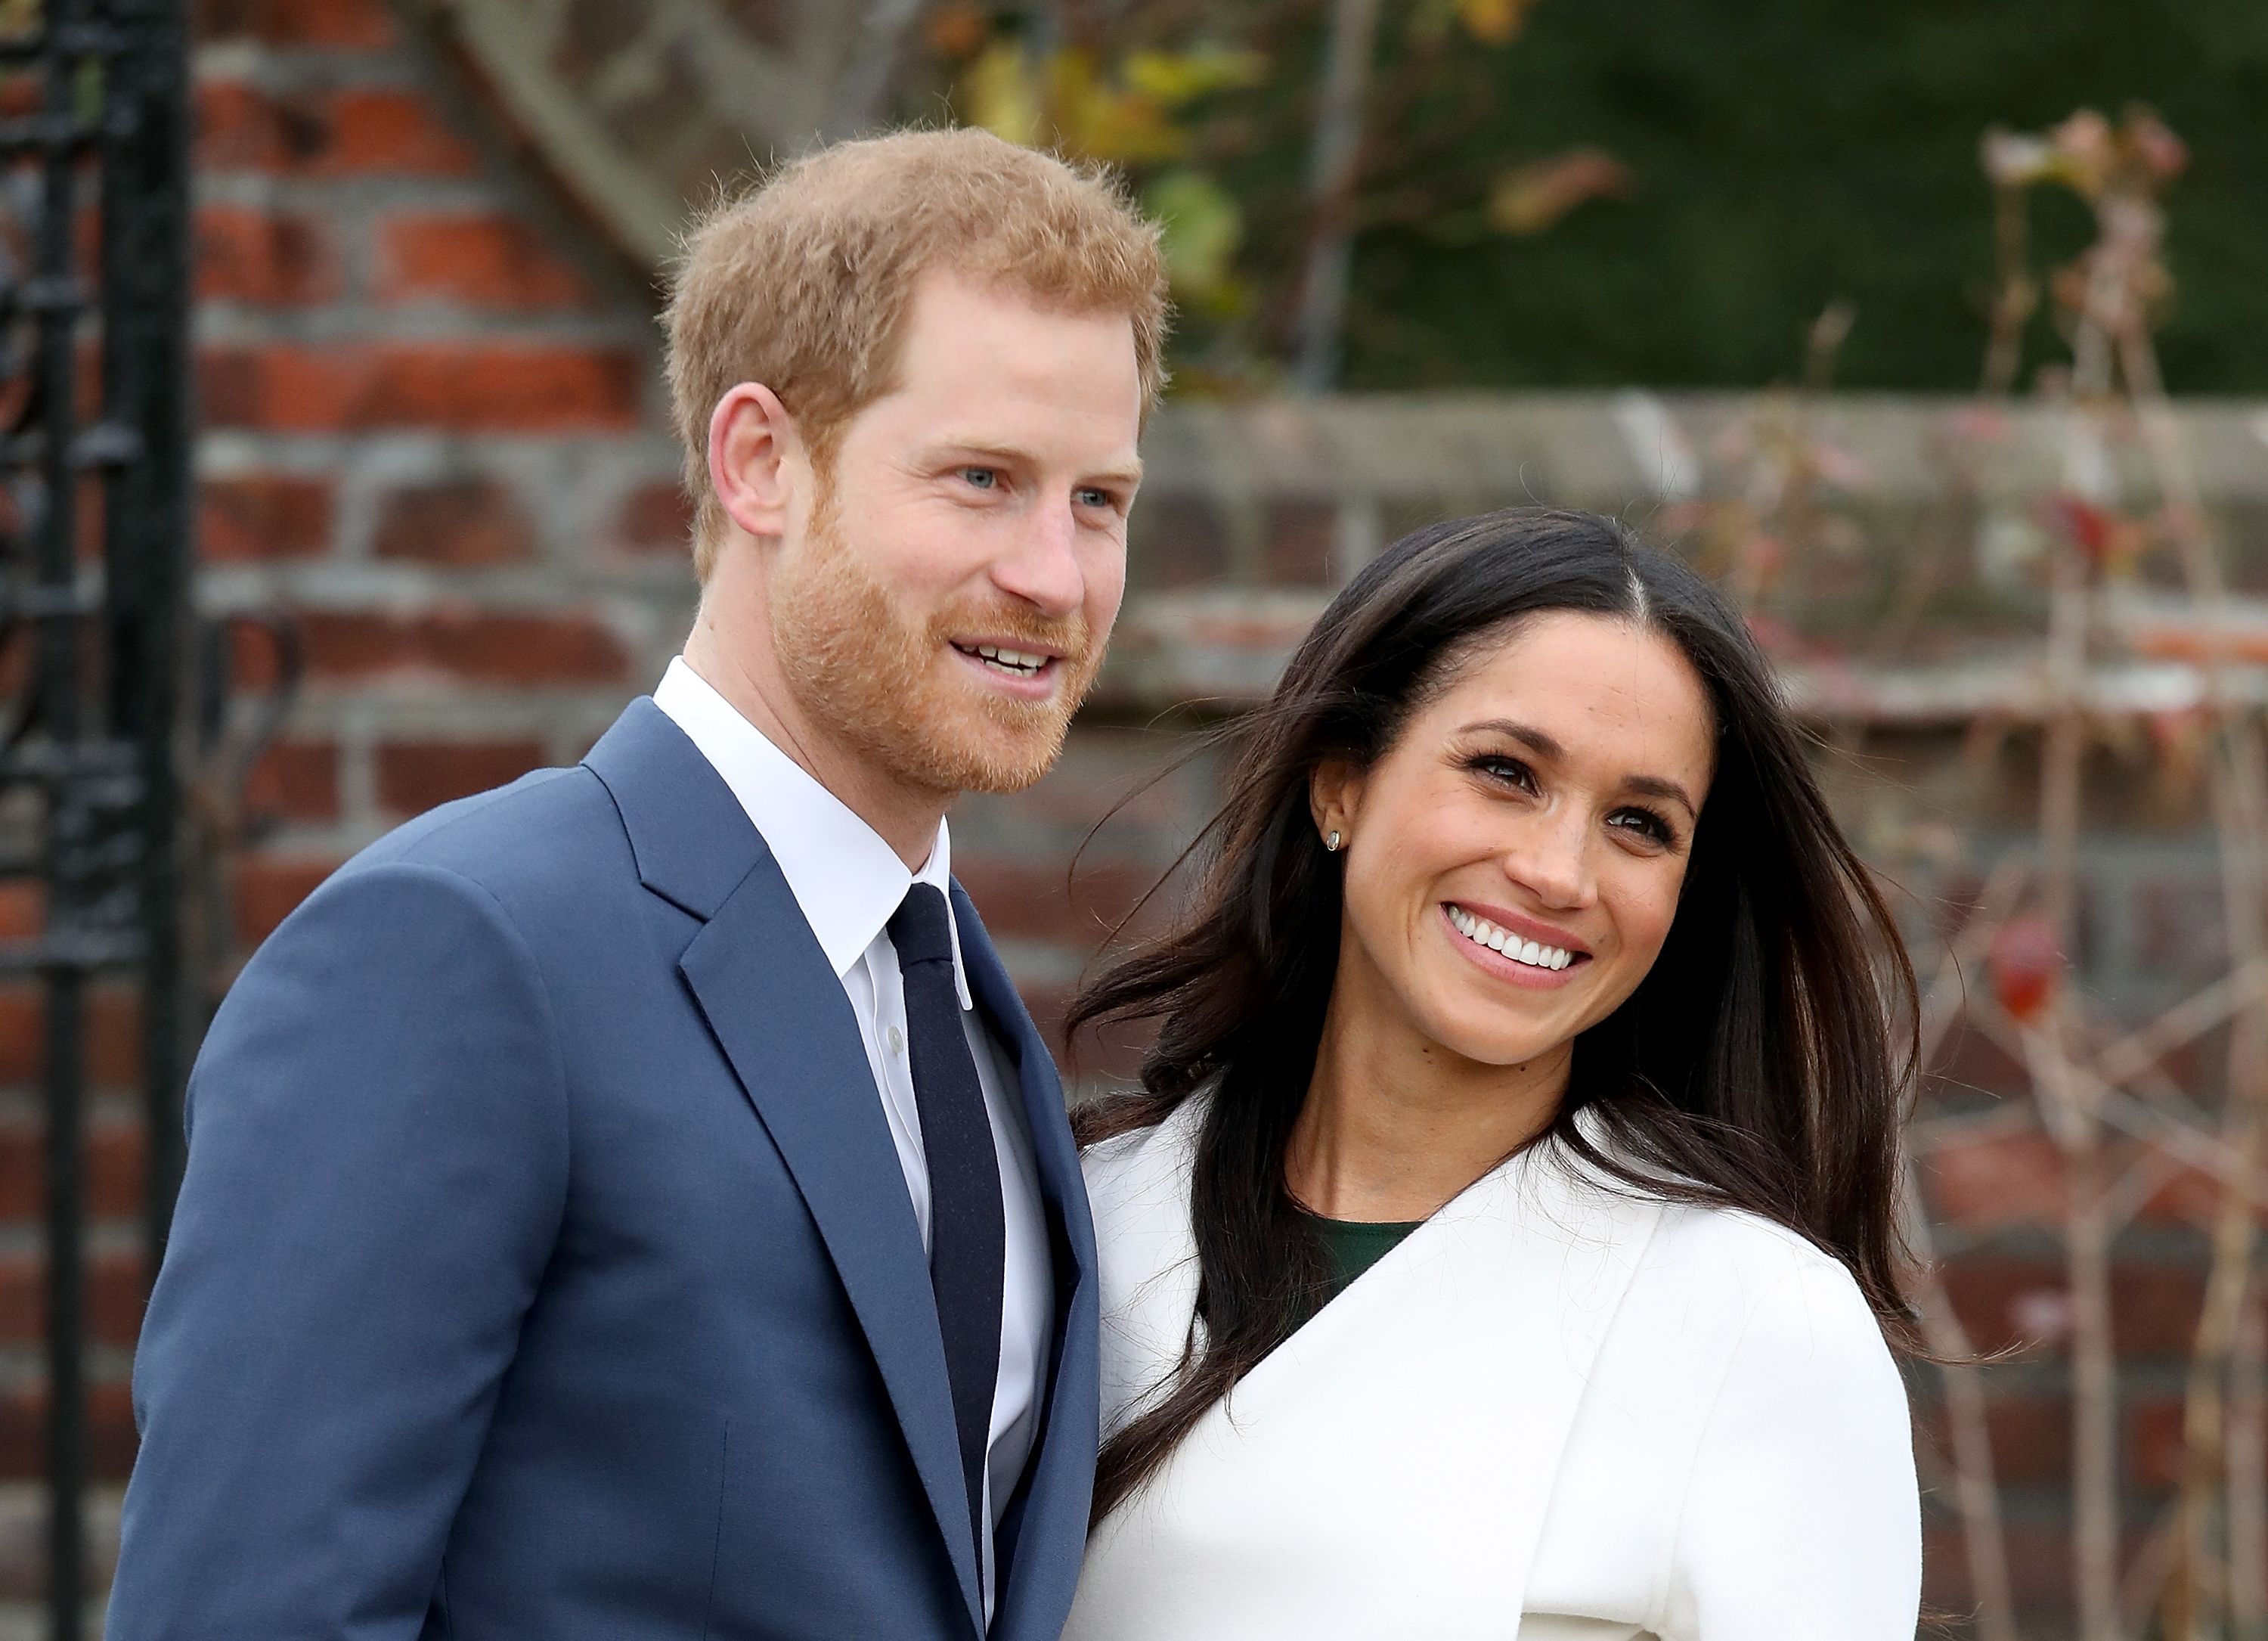 Prince Harry and actress Meghan Markle at an official photocall to announce their engagement at The Sunken Gardens at Kensington Palace on November 27, 2017. | Photo: Getty Images